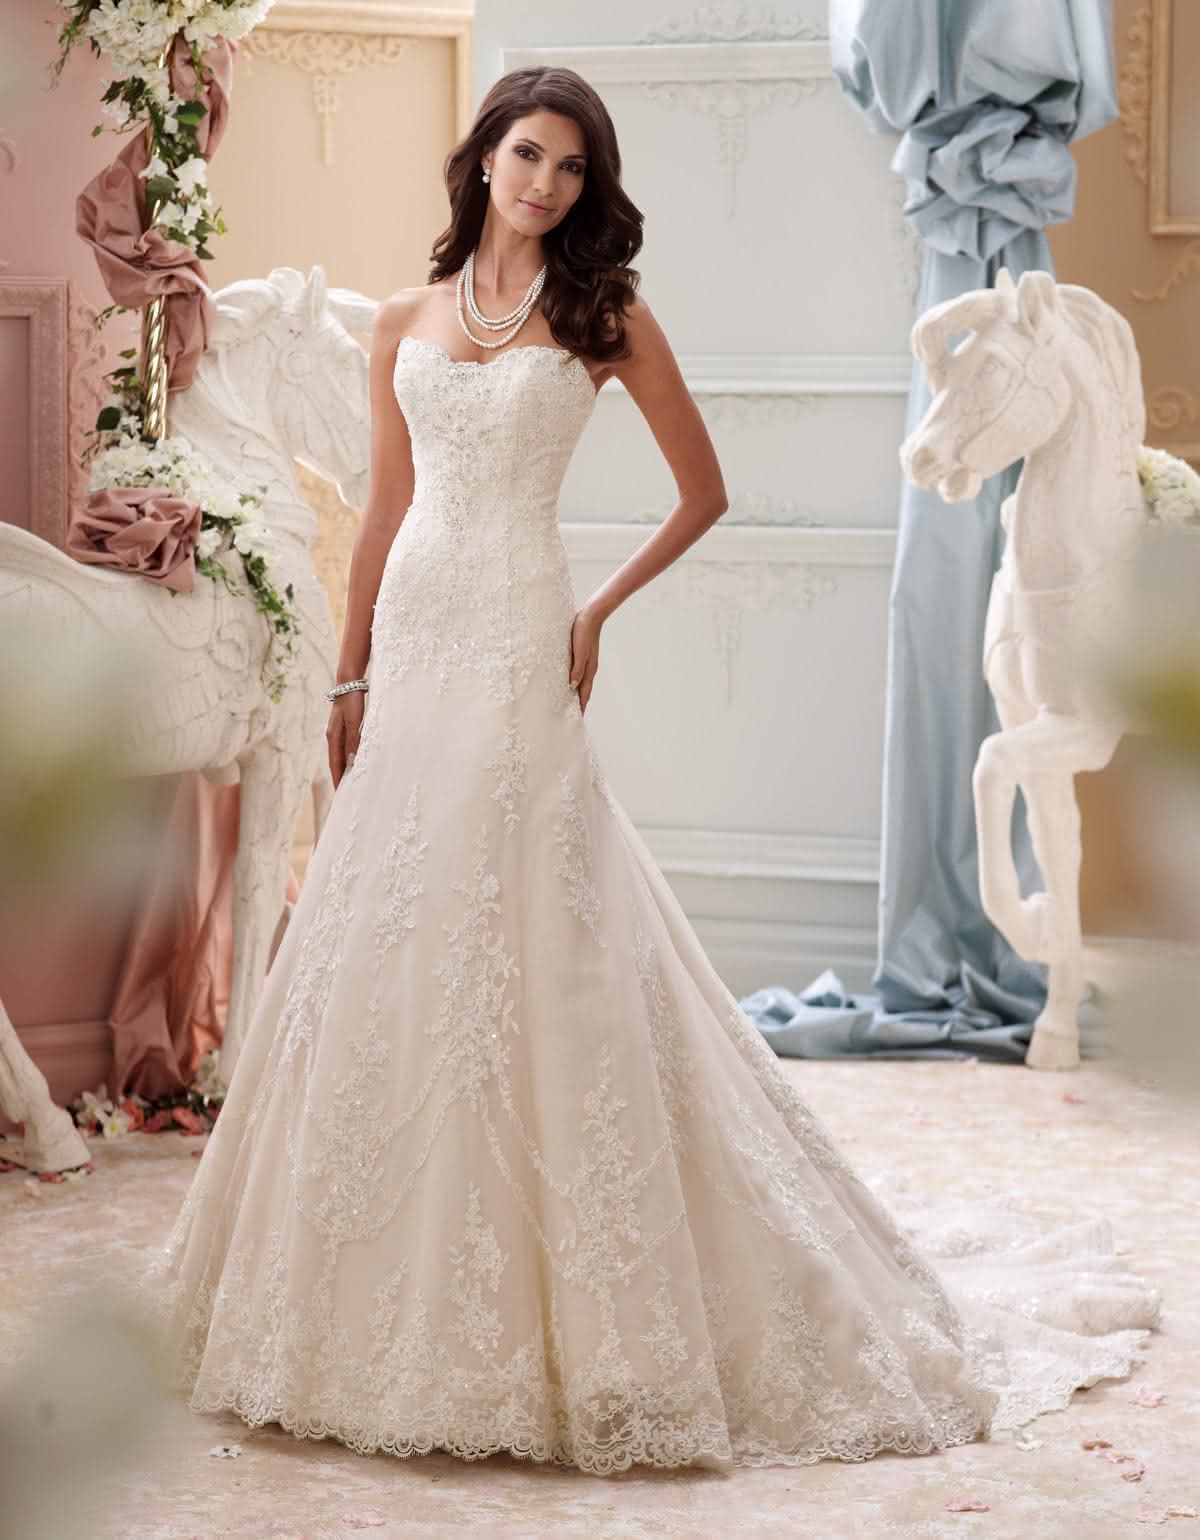 WEDDING DRESSES AND BRIDAL GOWNS turning the ordinary into extraordinary.